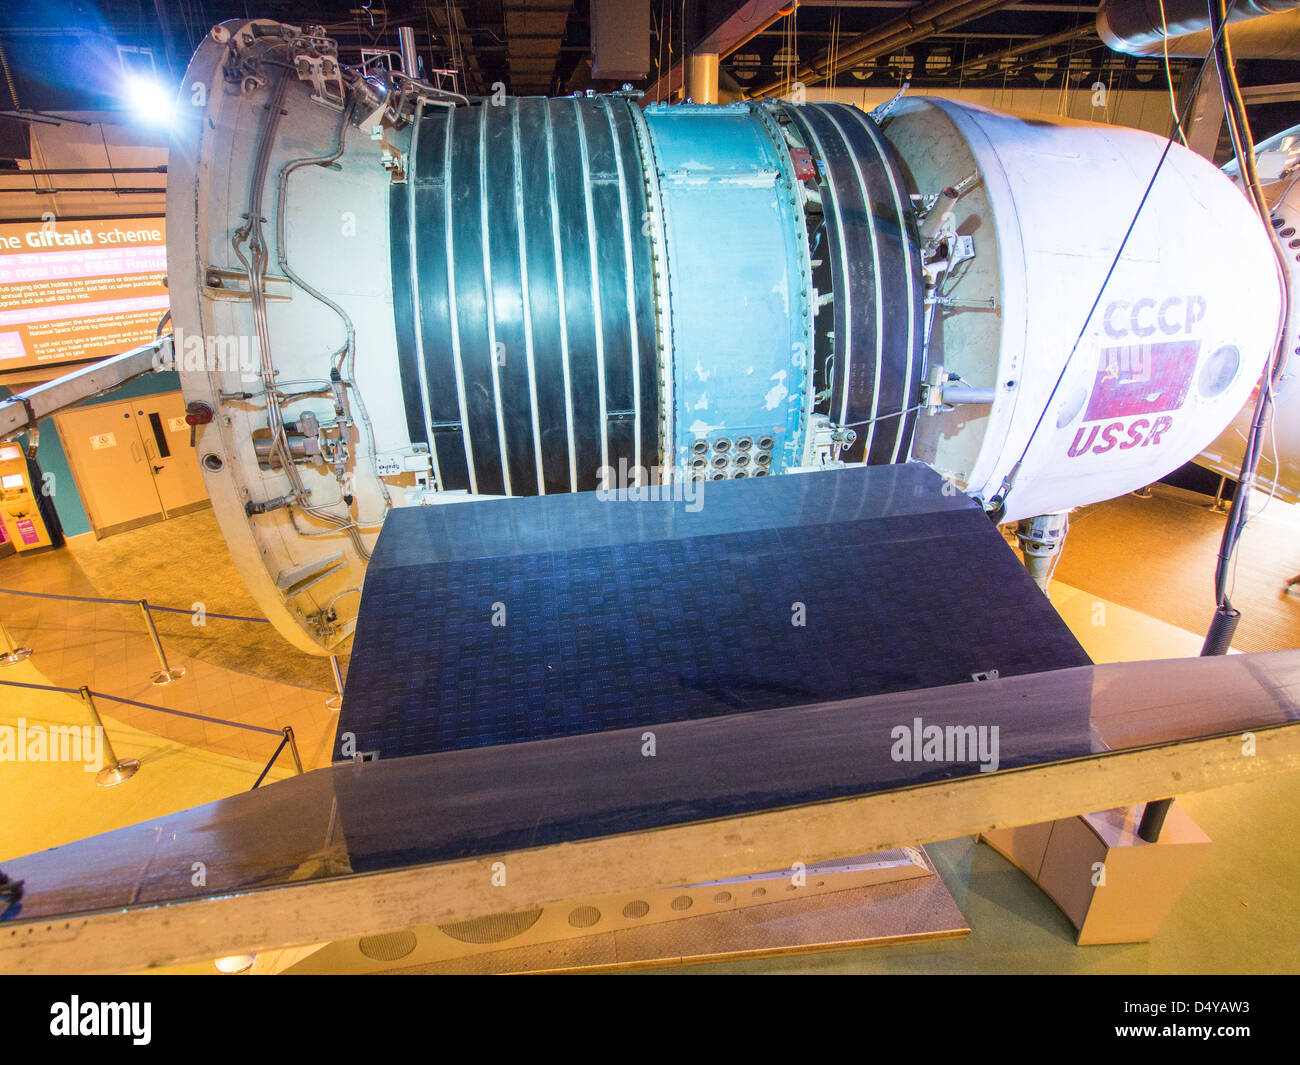 A 1960's Russian Soyuz space craft in the National Space Centre in Leicester, UK. Stock Photo